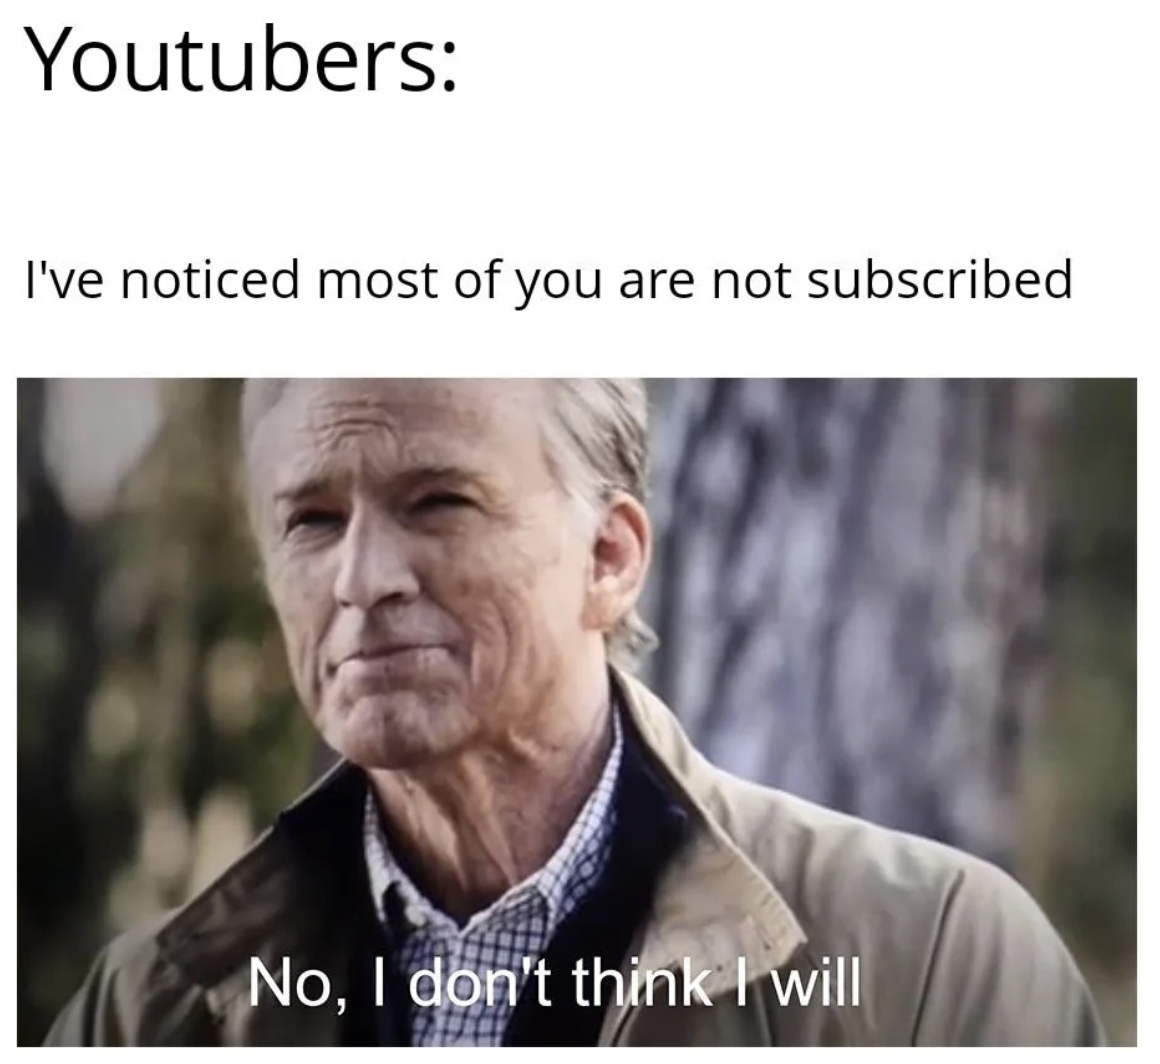 photo caption - Youtubers I've noticed most of you are not subscribed No, I don't think I will